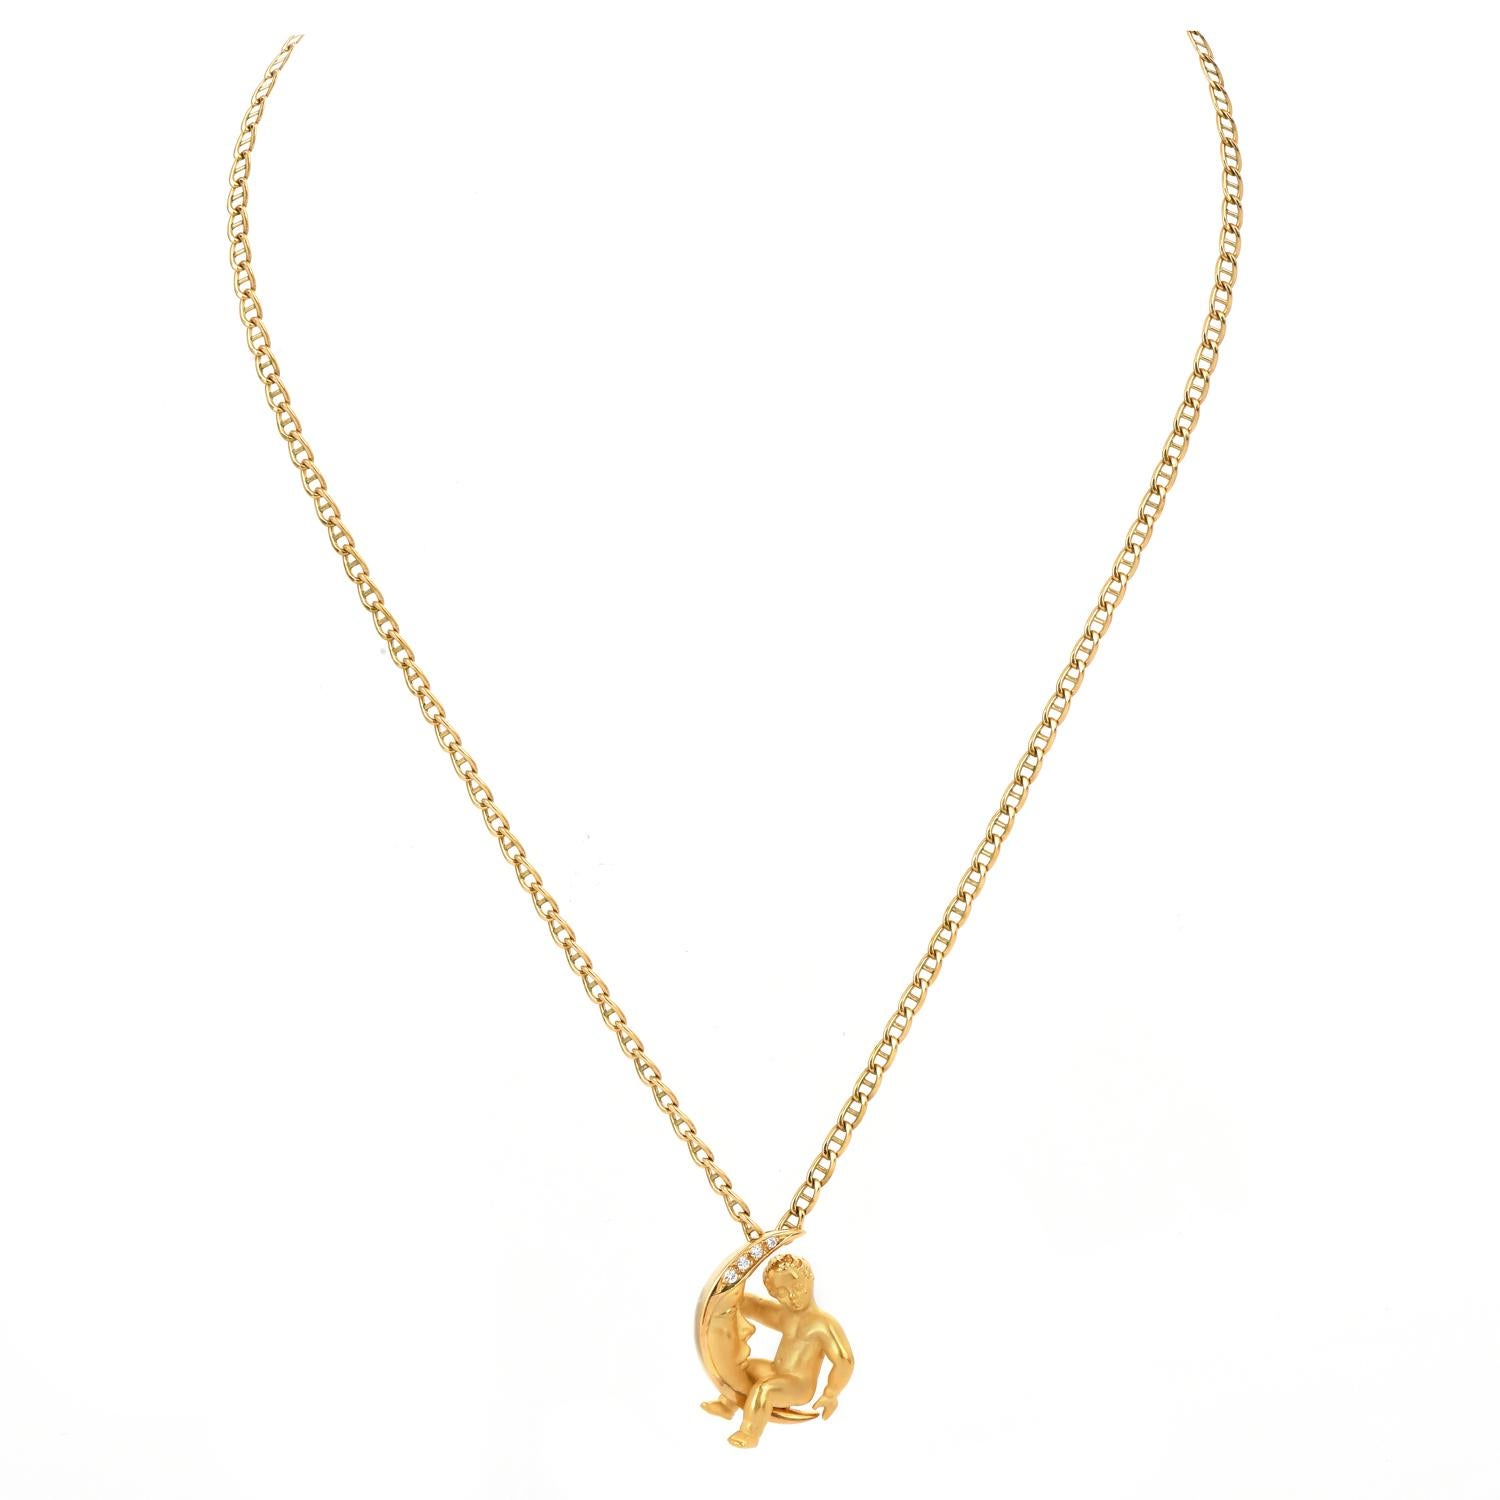 An exquisite Moon & Child-inspired piece from Carrera & Carrery in Spain.

This adorable pendant is crafted in solid 18K Yellow Gold.

The moon is accented with (4) Round cut, genuine Diamonds, Weighing approx. 0.08 carats,  G-H color & -